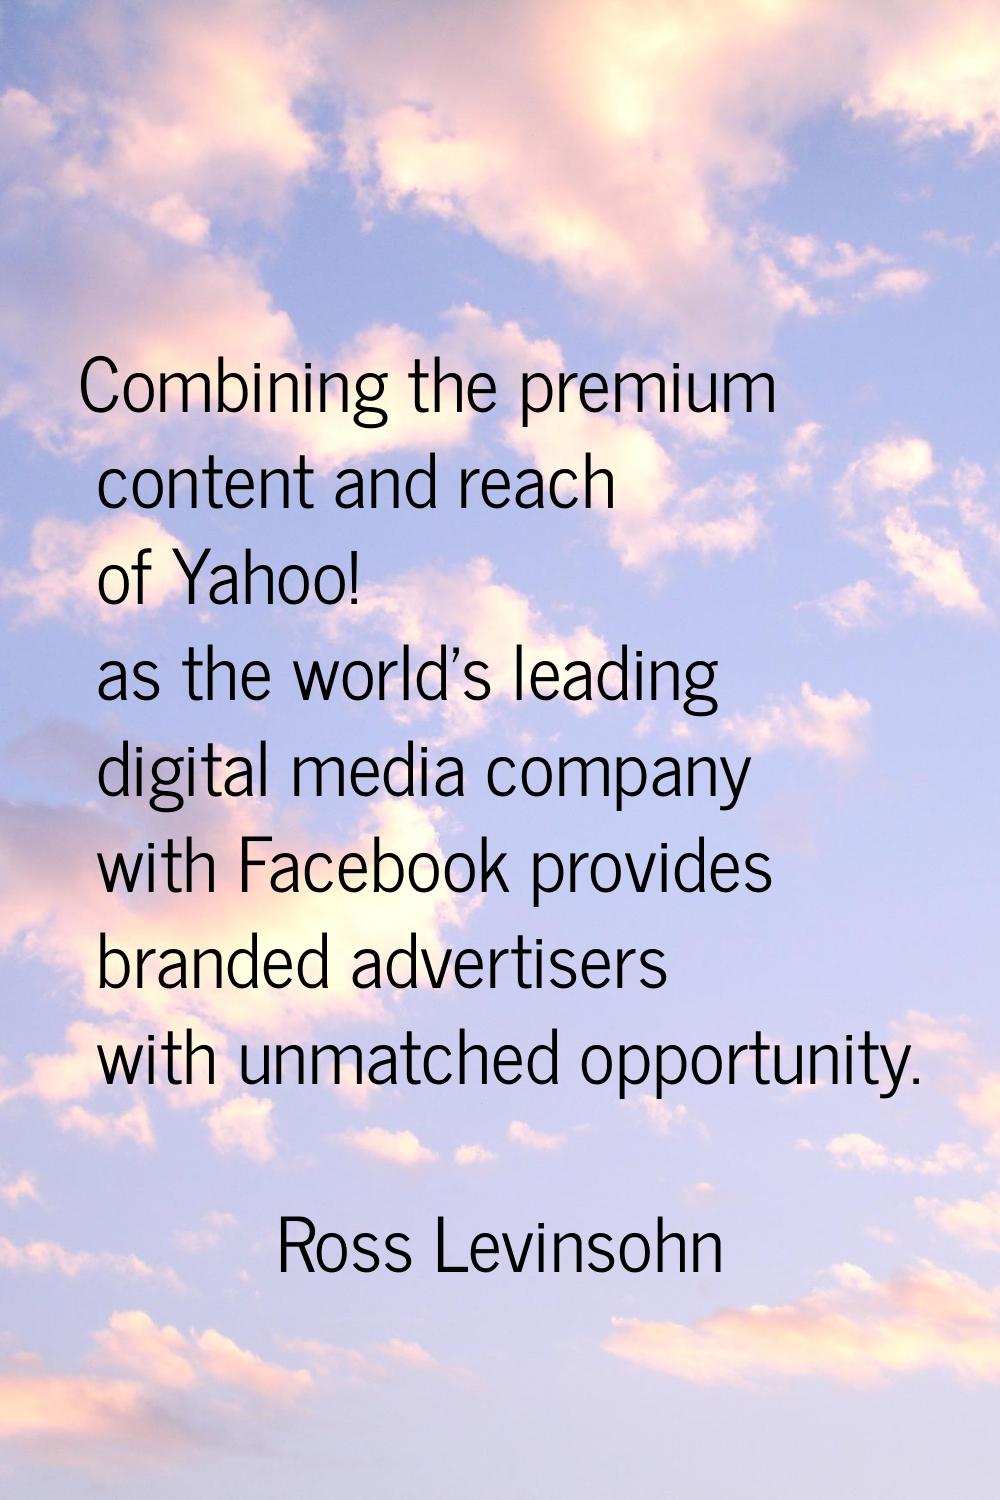 Combining the premium content and reach of Yahoo! as the world's leading digital media company with